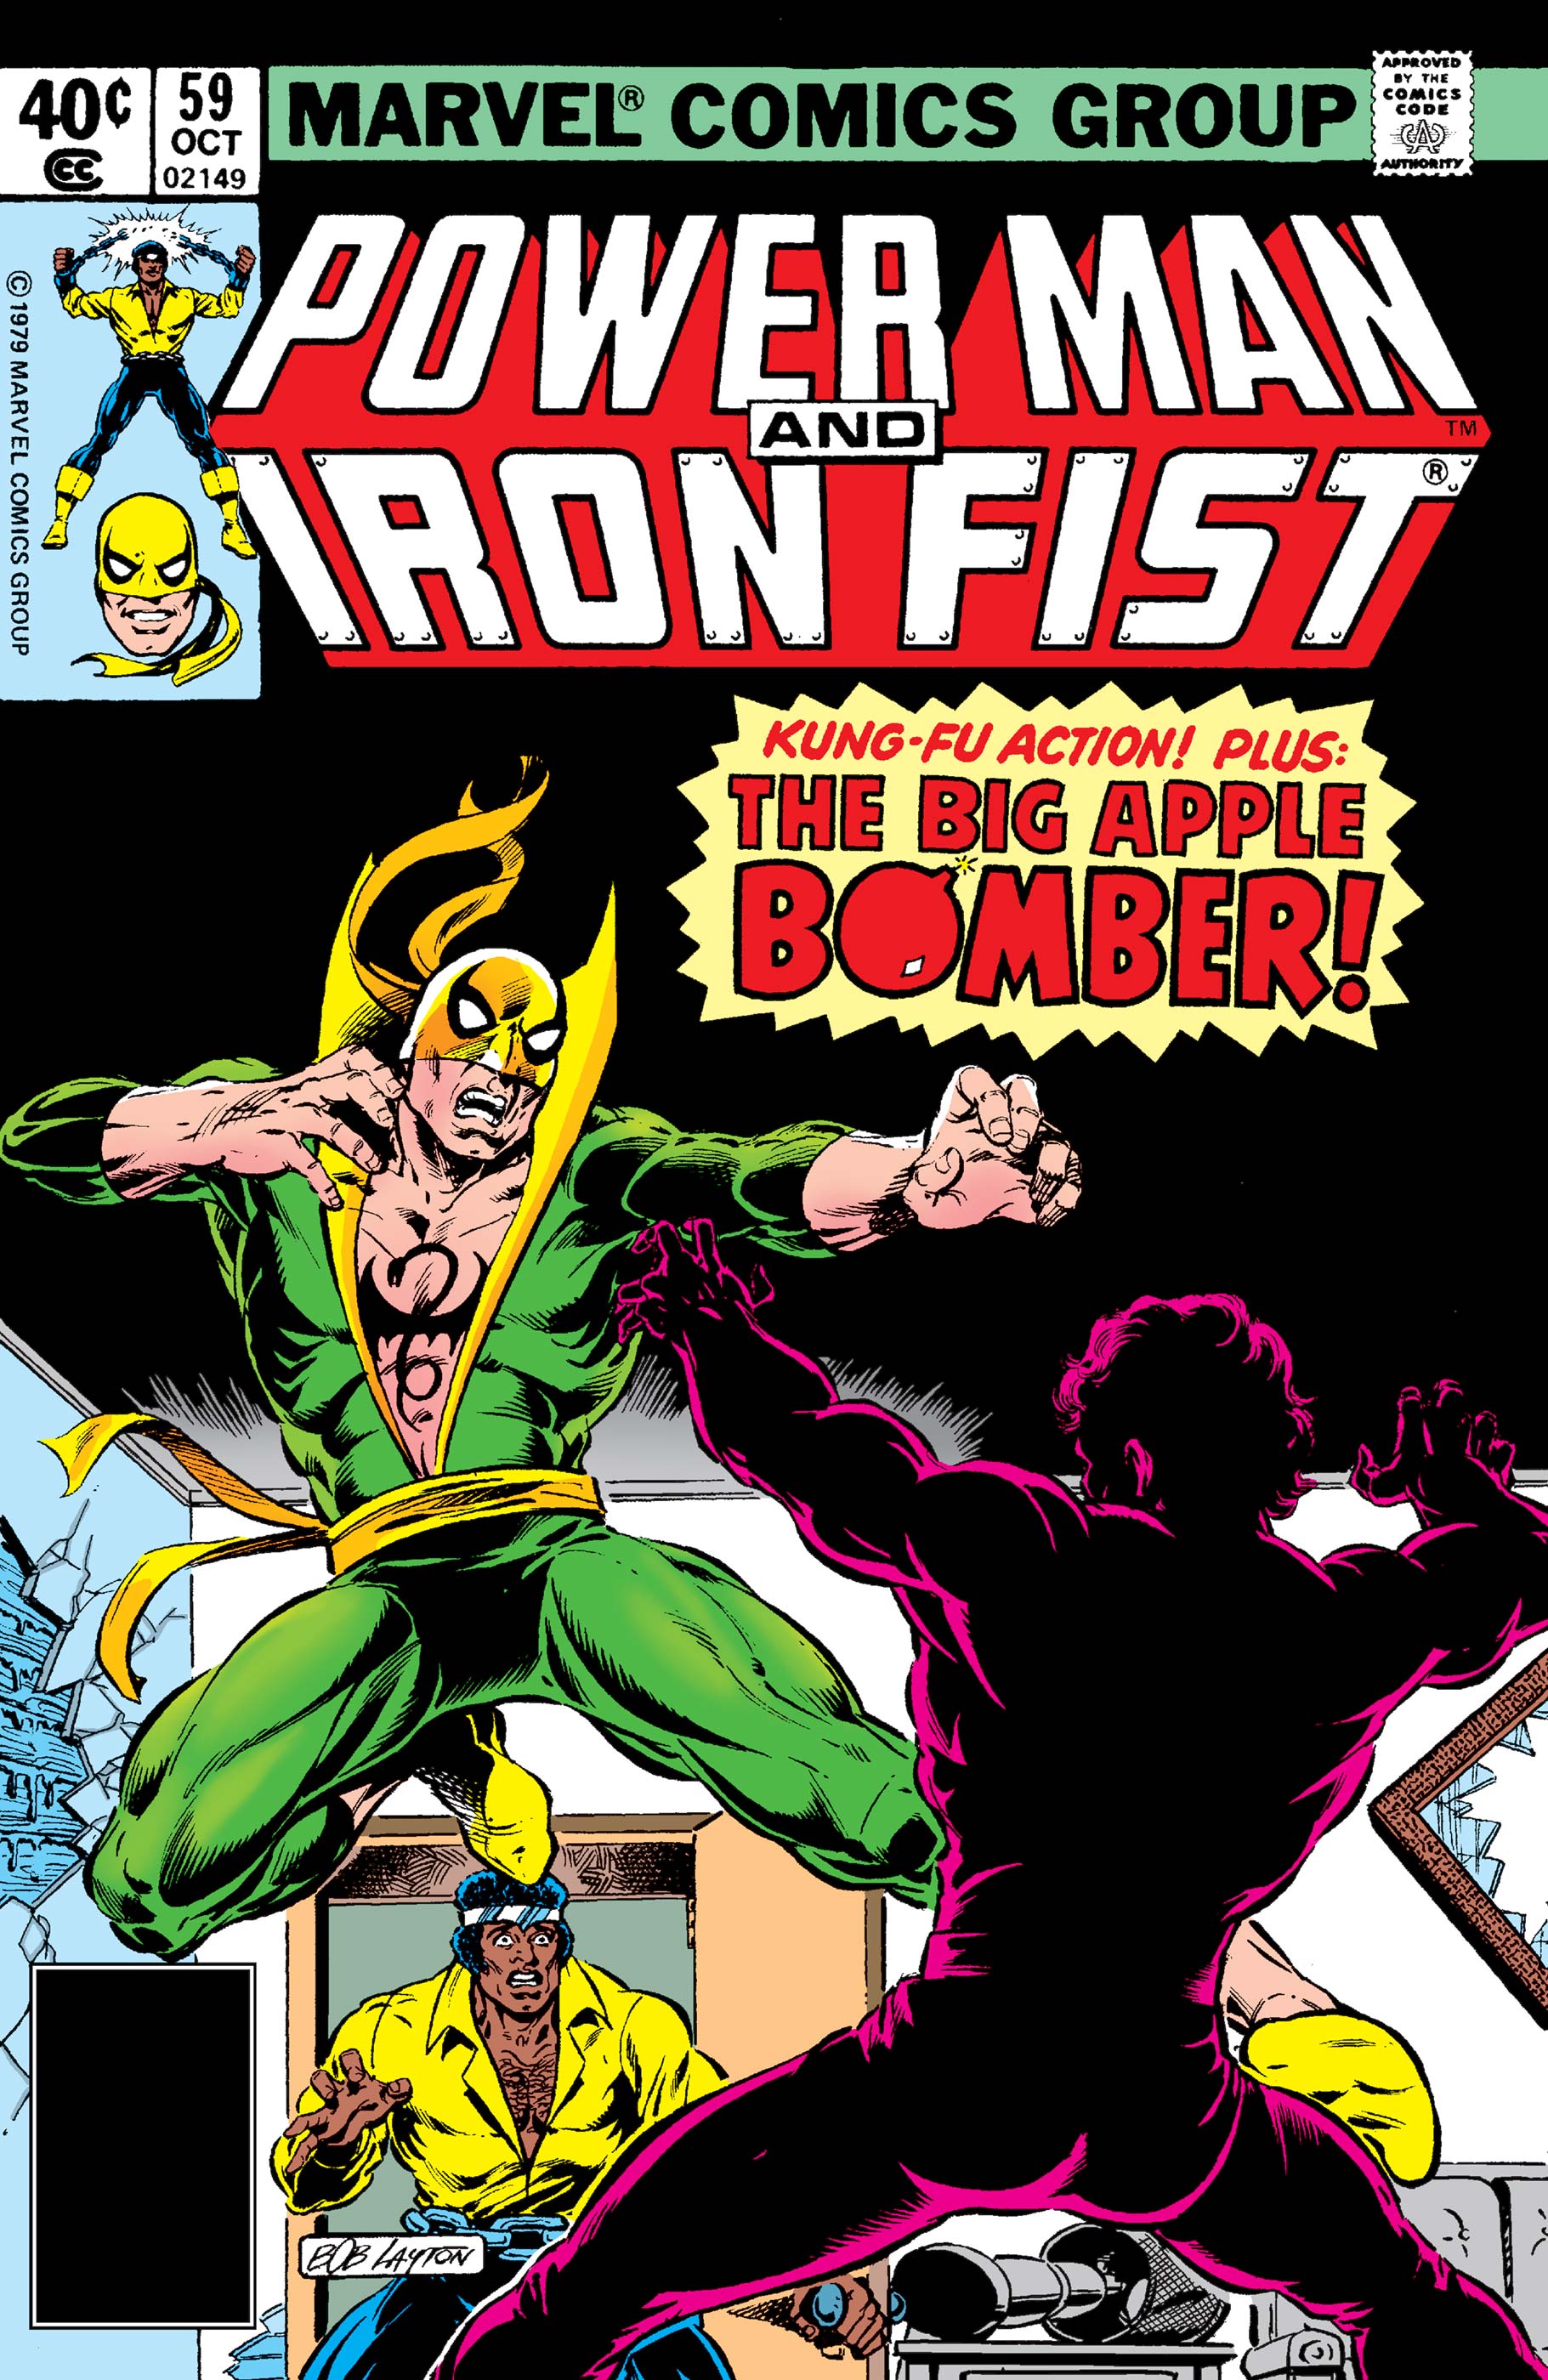 Power Man and Iron Fist (1978) #59